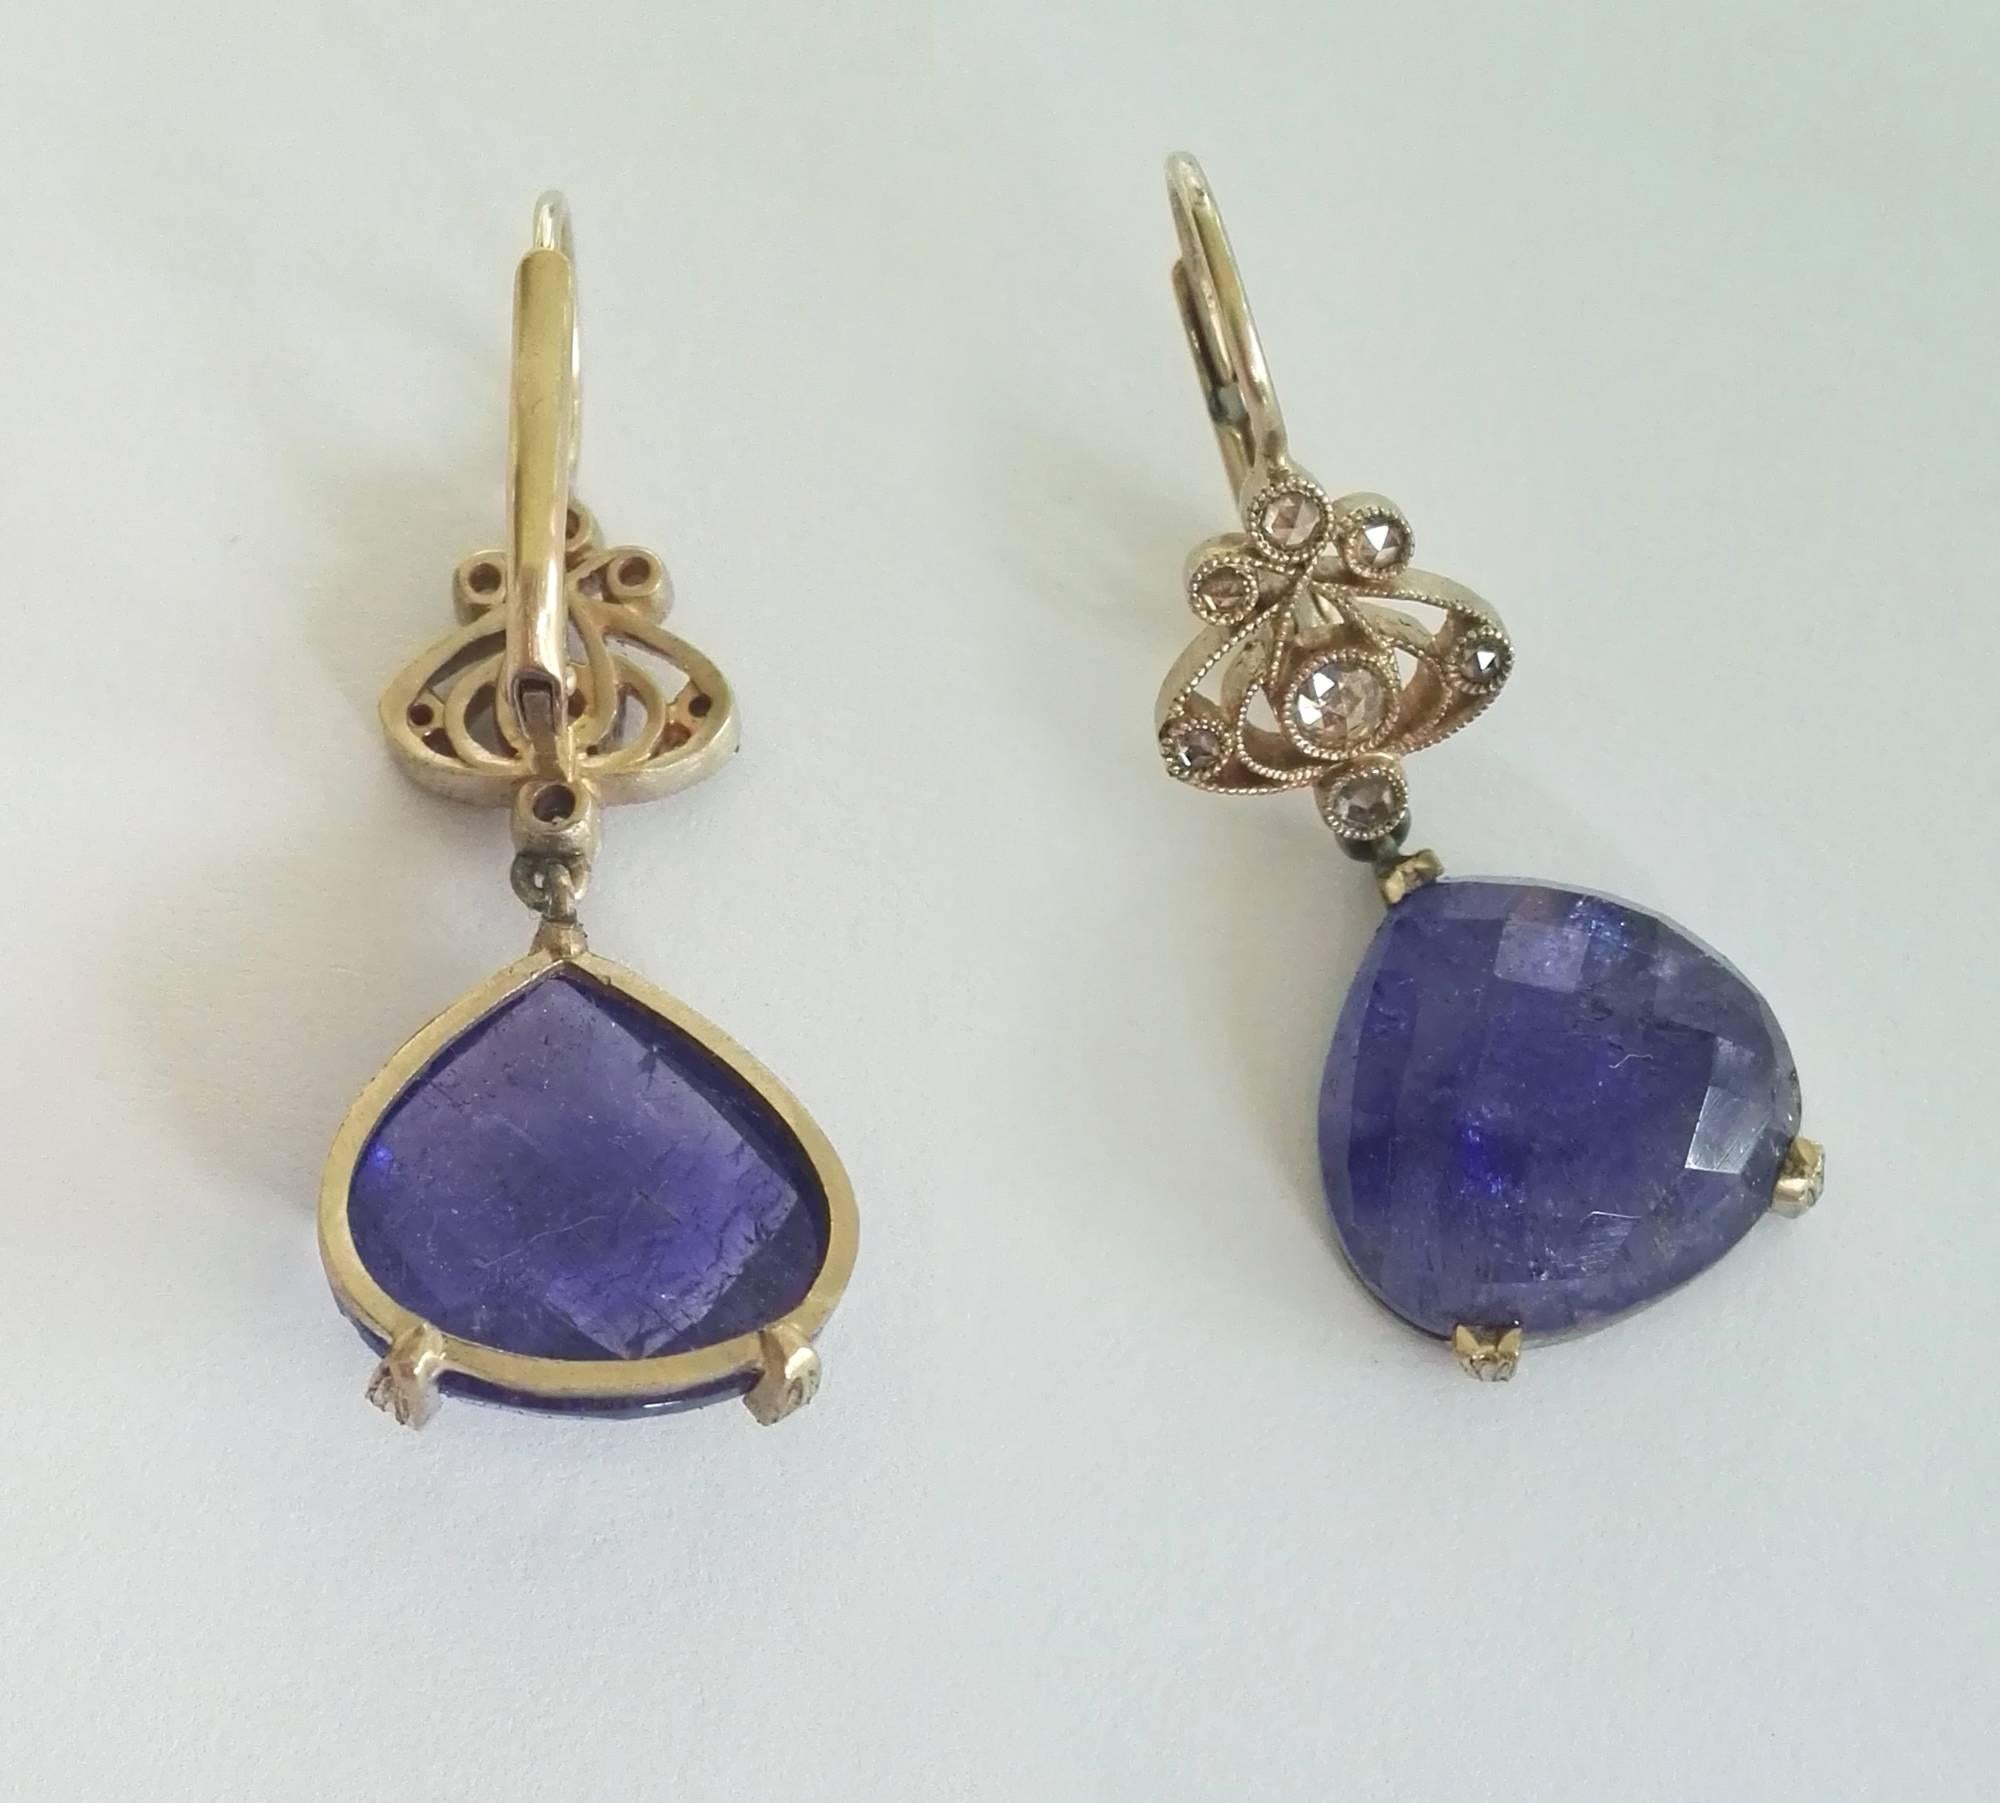 Dalben design Tanzanite and Diamond pendant earrings mounted in 18 kt white gold.
Two Pear cut Tanzanite weighting 15,60 carat and 14 rose cut light brown Diamonds weighing 0,36 carats.
Dimension: width 14 mm, height 35 mm.
The Earrings has been